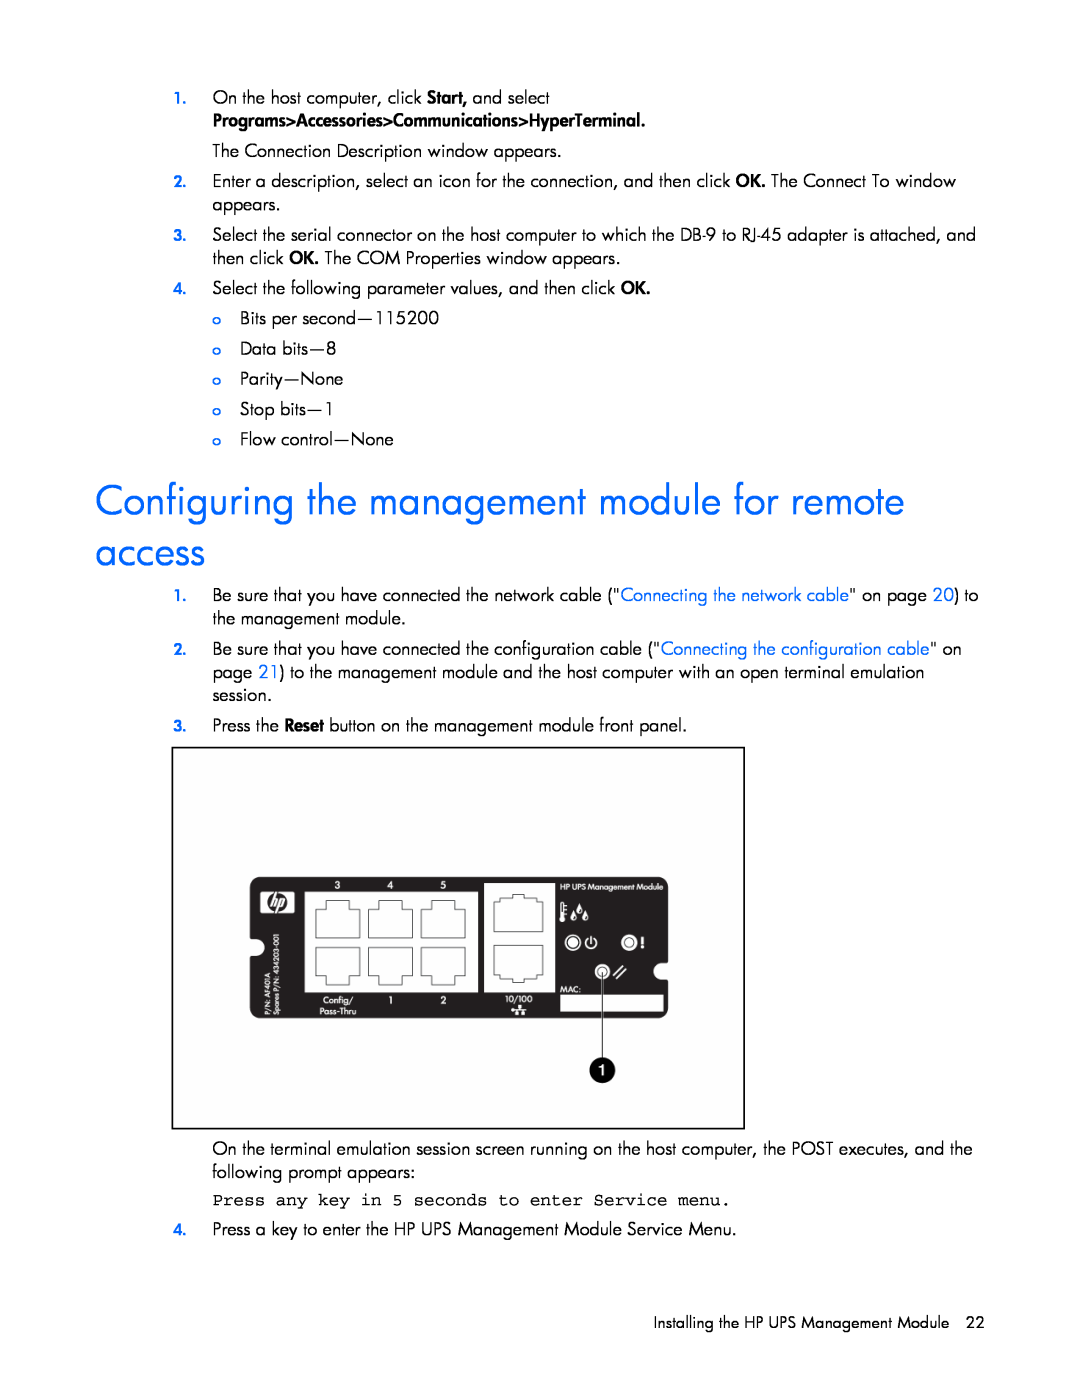 HP A1354A, A6584A, A1353A, A1356A, J4373A, J4370A, J4367A manual Configuring the management module for remote access 